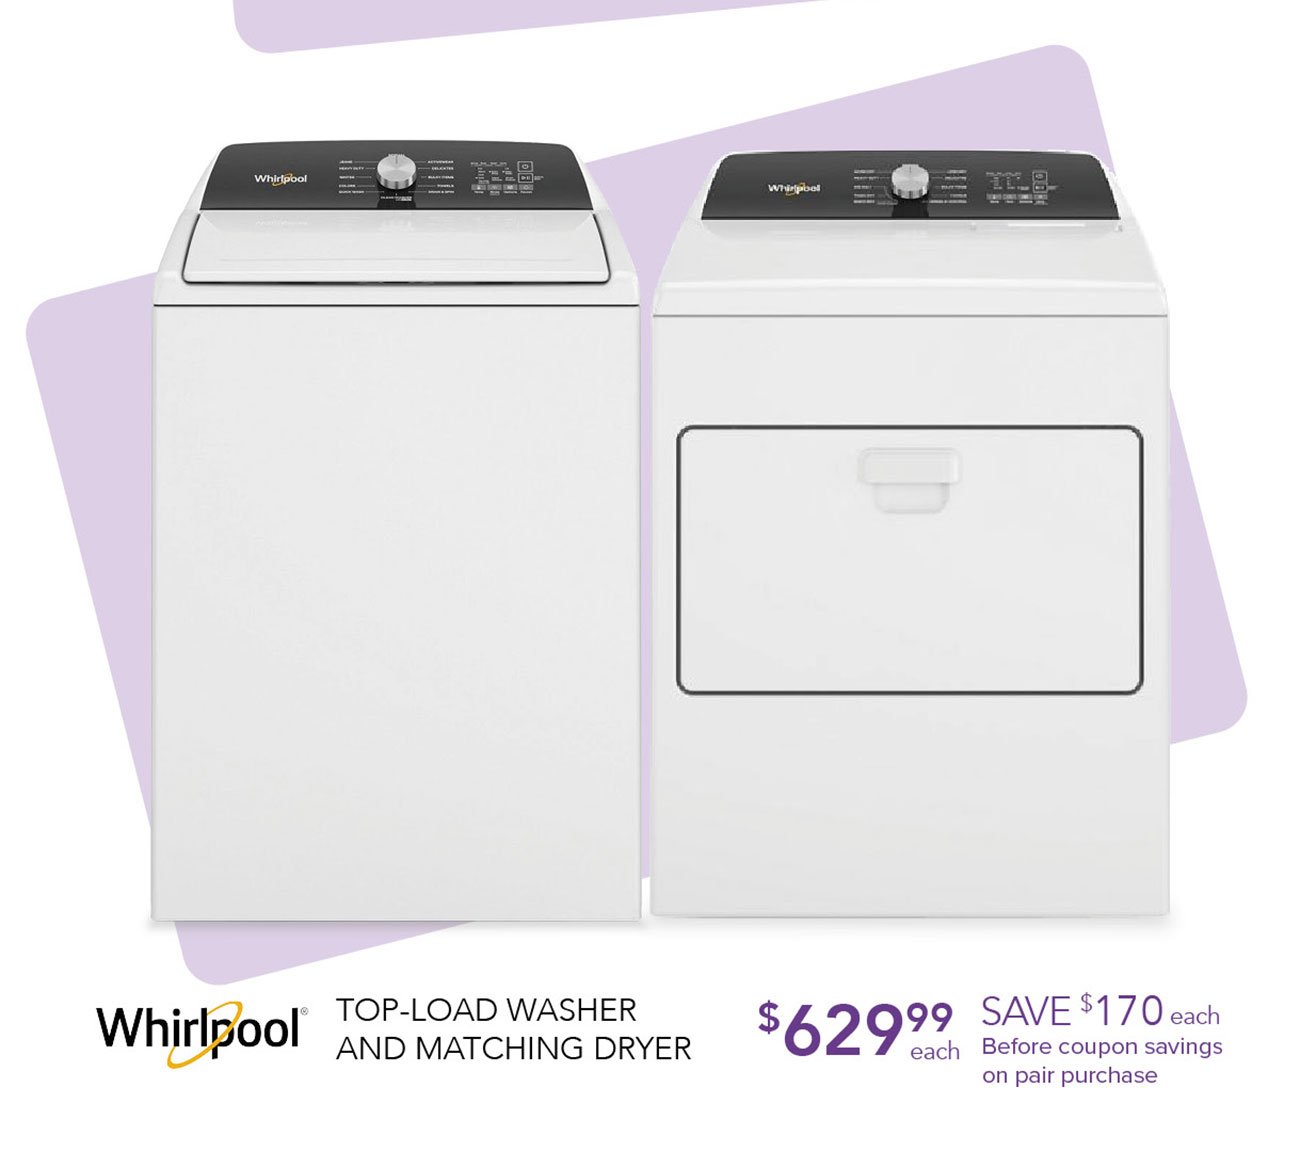 Whirlpool-top-load-washer-dryer